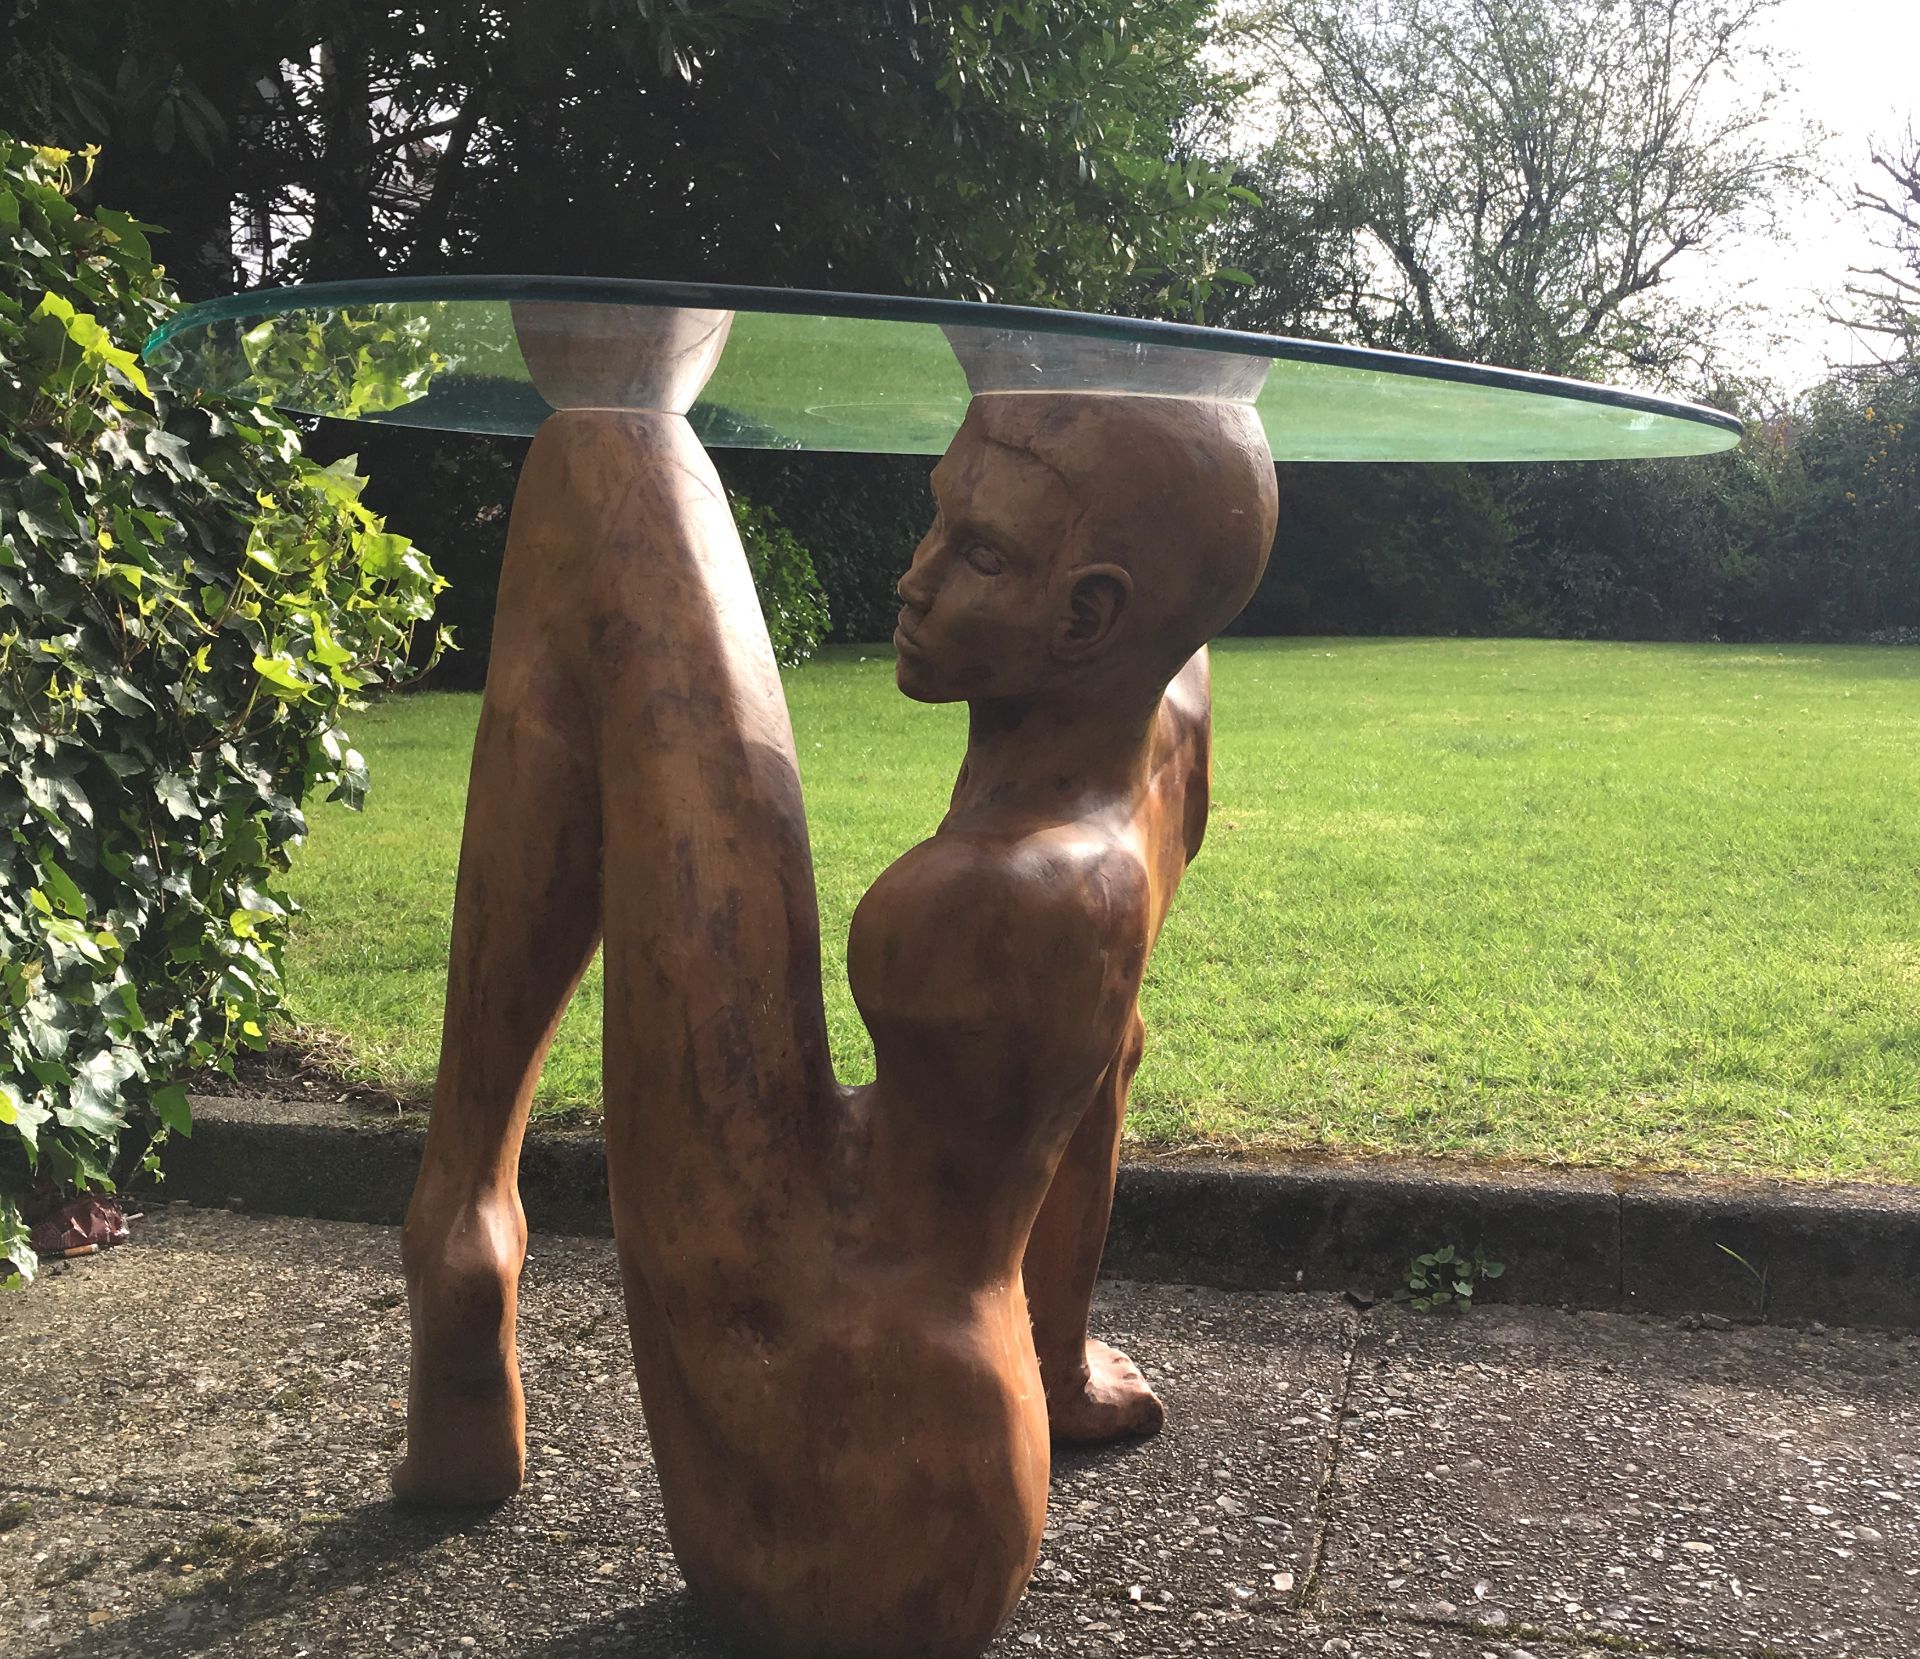 Enigma' sculpture, carved wood and glass by Andrew Swinton - Image 3 of 12